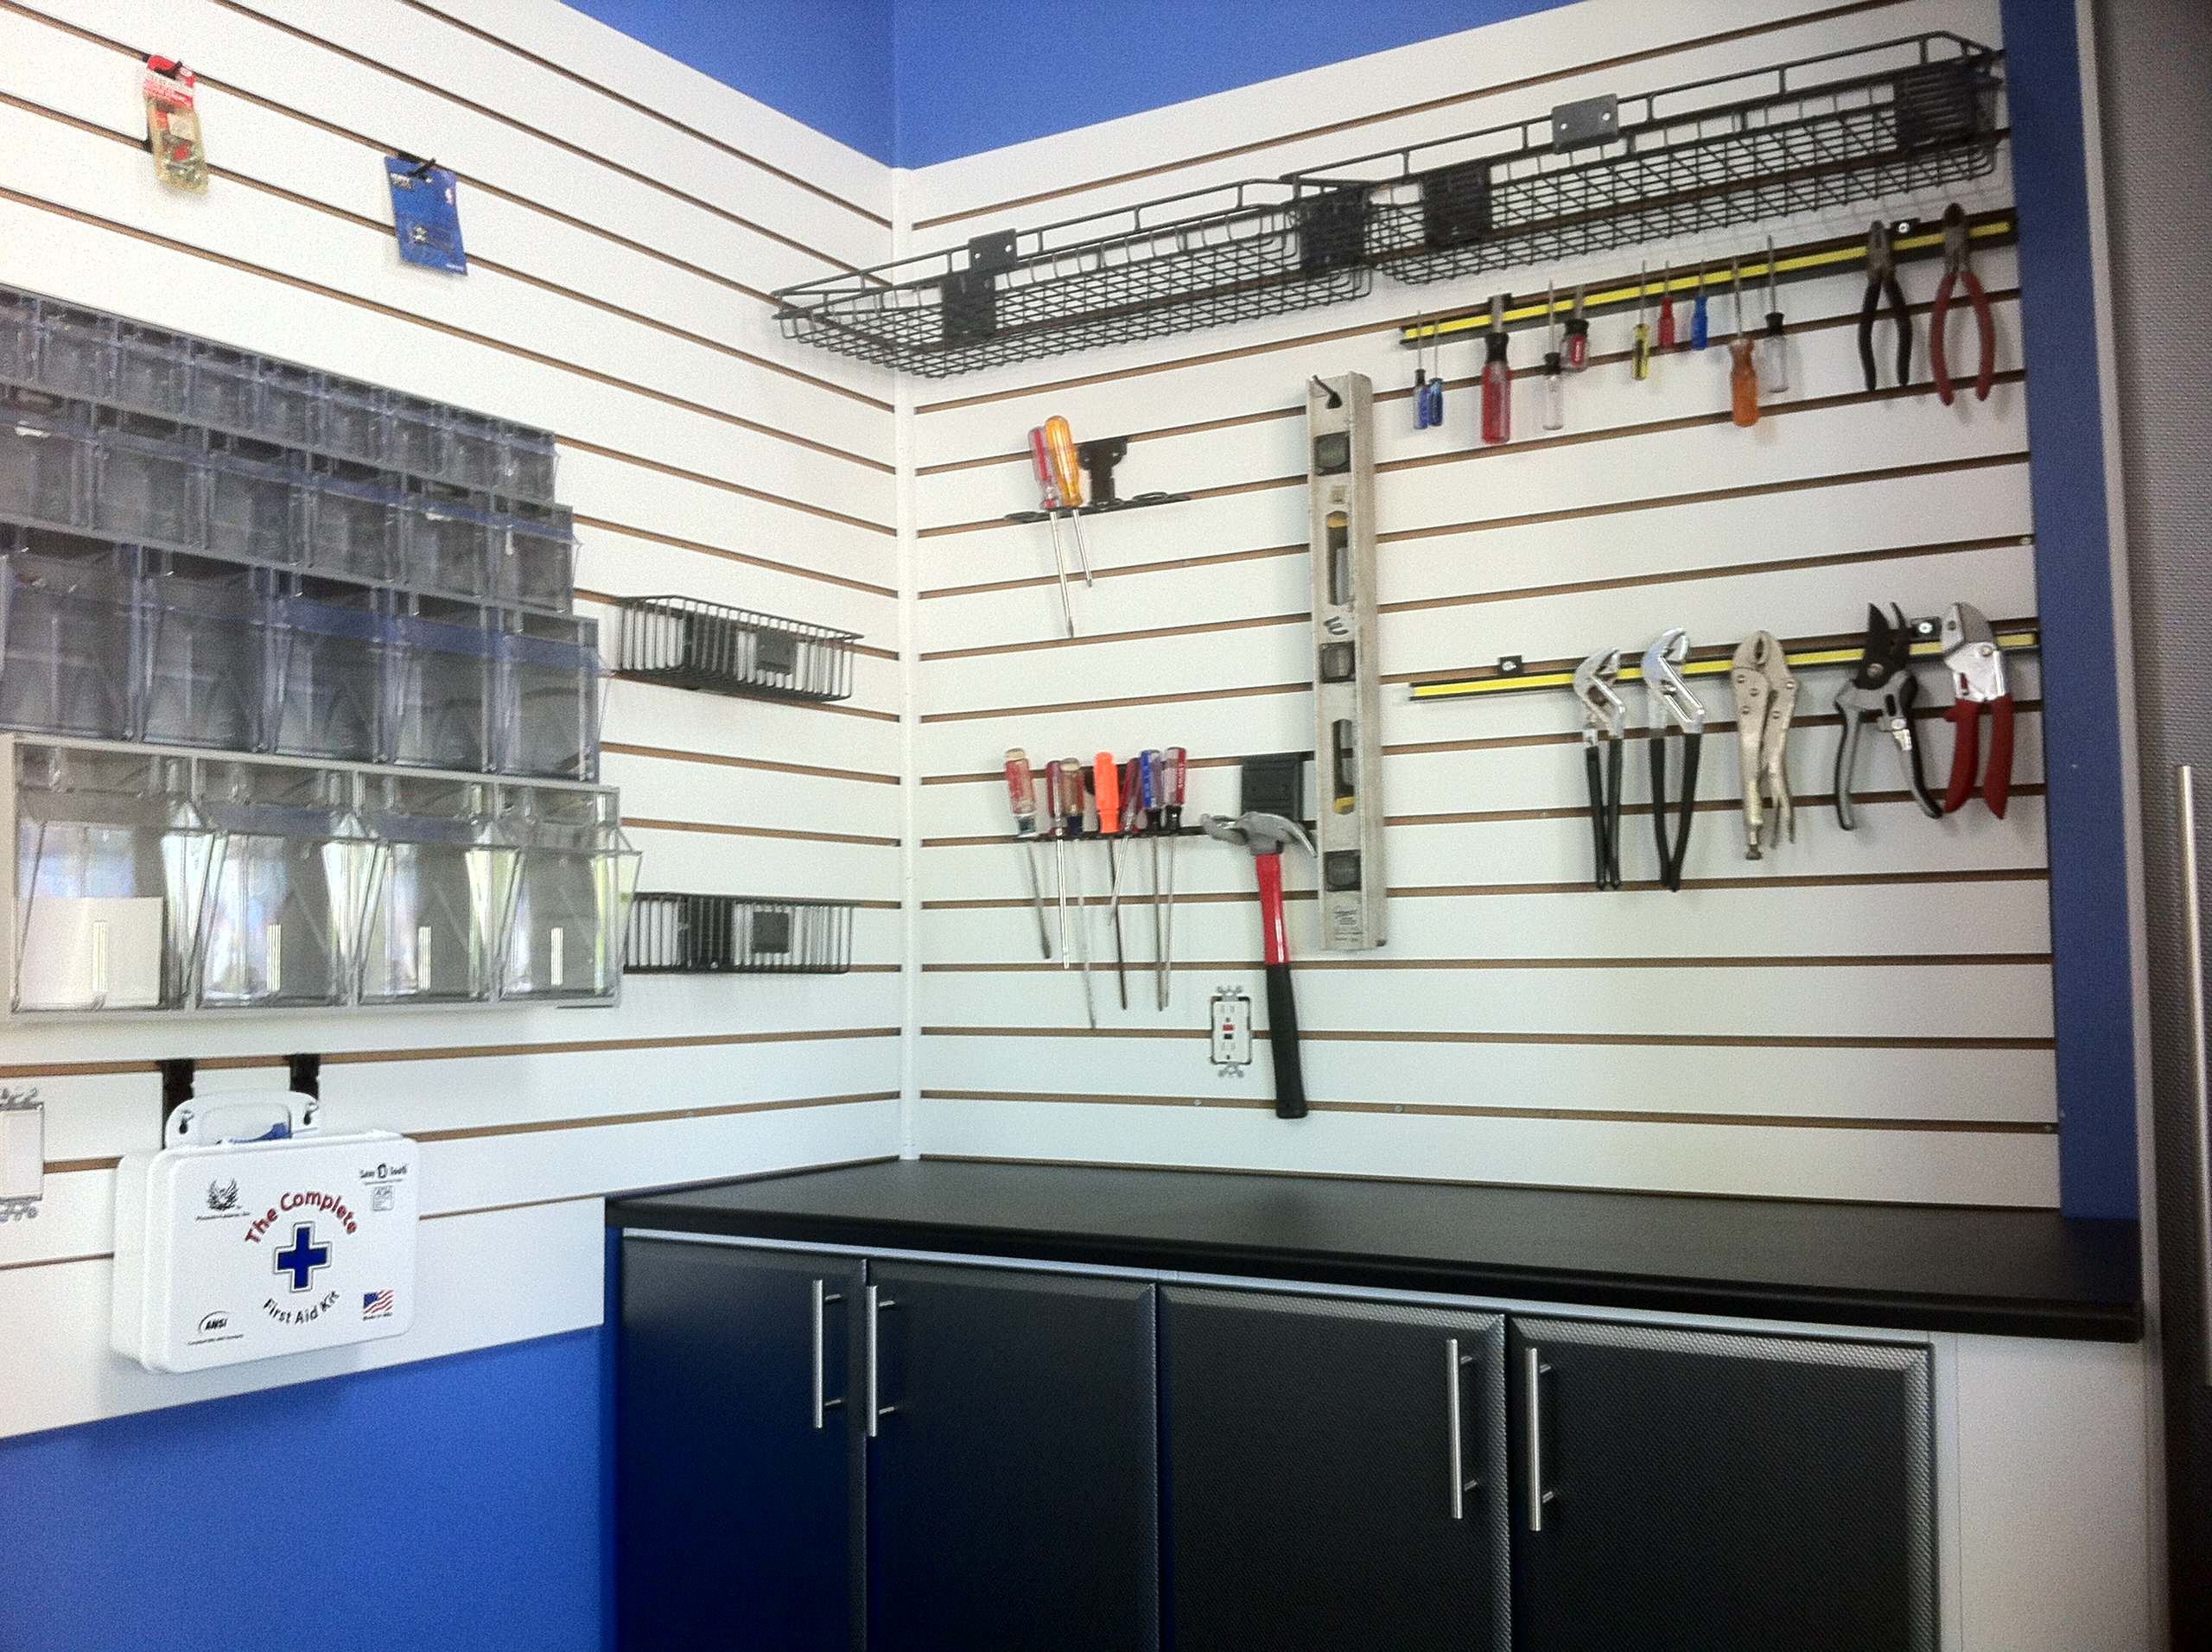 Garage Storage and with Hooks and Slatwall